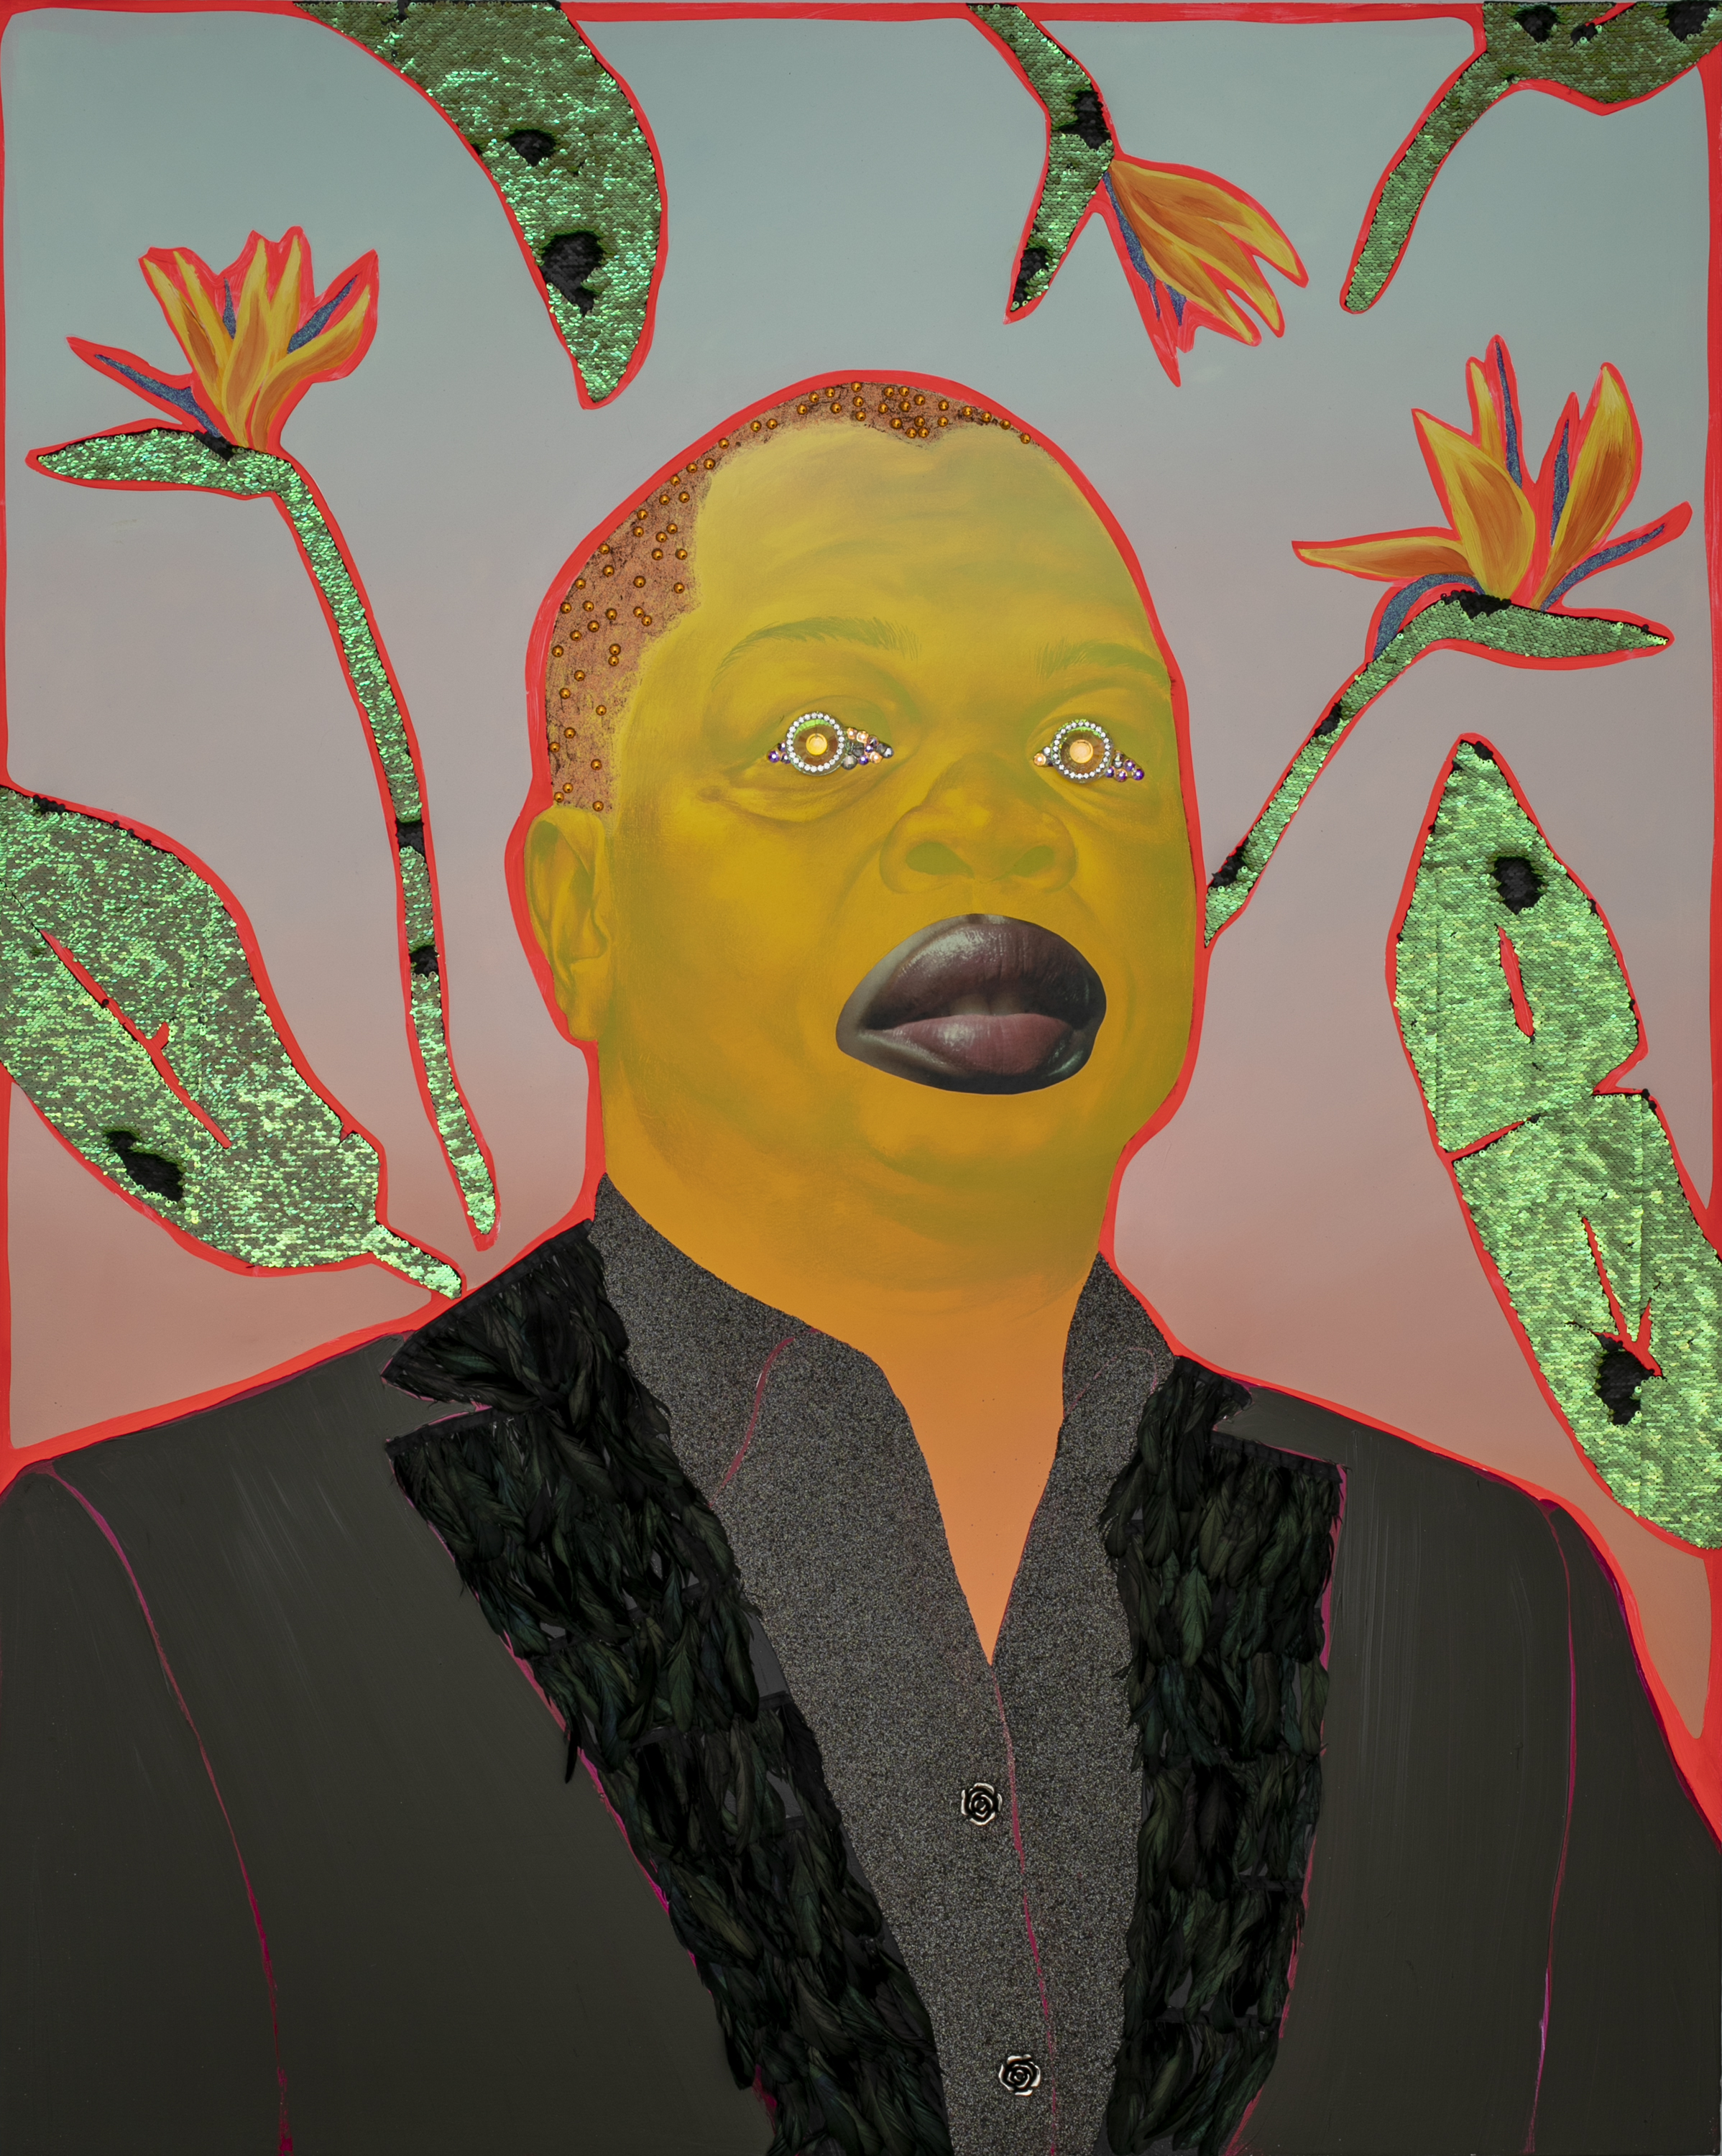 Image: Devan Shimoyama, “Kehinde,” 2018. Portrait of artist Kehinde Wiley. A single male figure is pictured from the chest up. The face is painted yellow, and he wears a black shirt and jacket. In the place of the eyes are colorful, glittery jewels. Behind him are seven leaves and flowers on a background that fades from red at the bottom to blue at the top. Image courtesy of the Smithsonian Institution Traveling Exhibition Service and the artist.